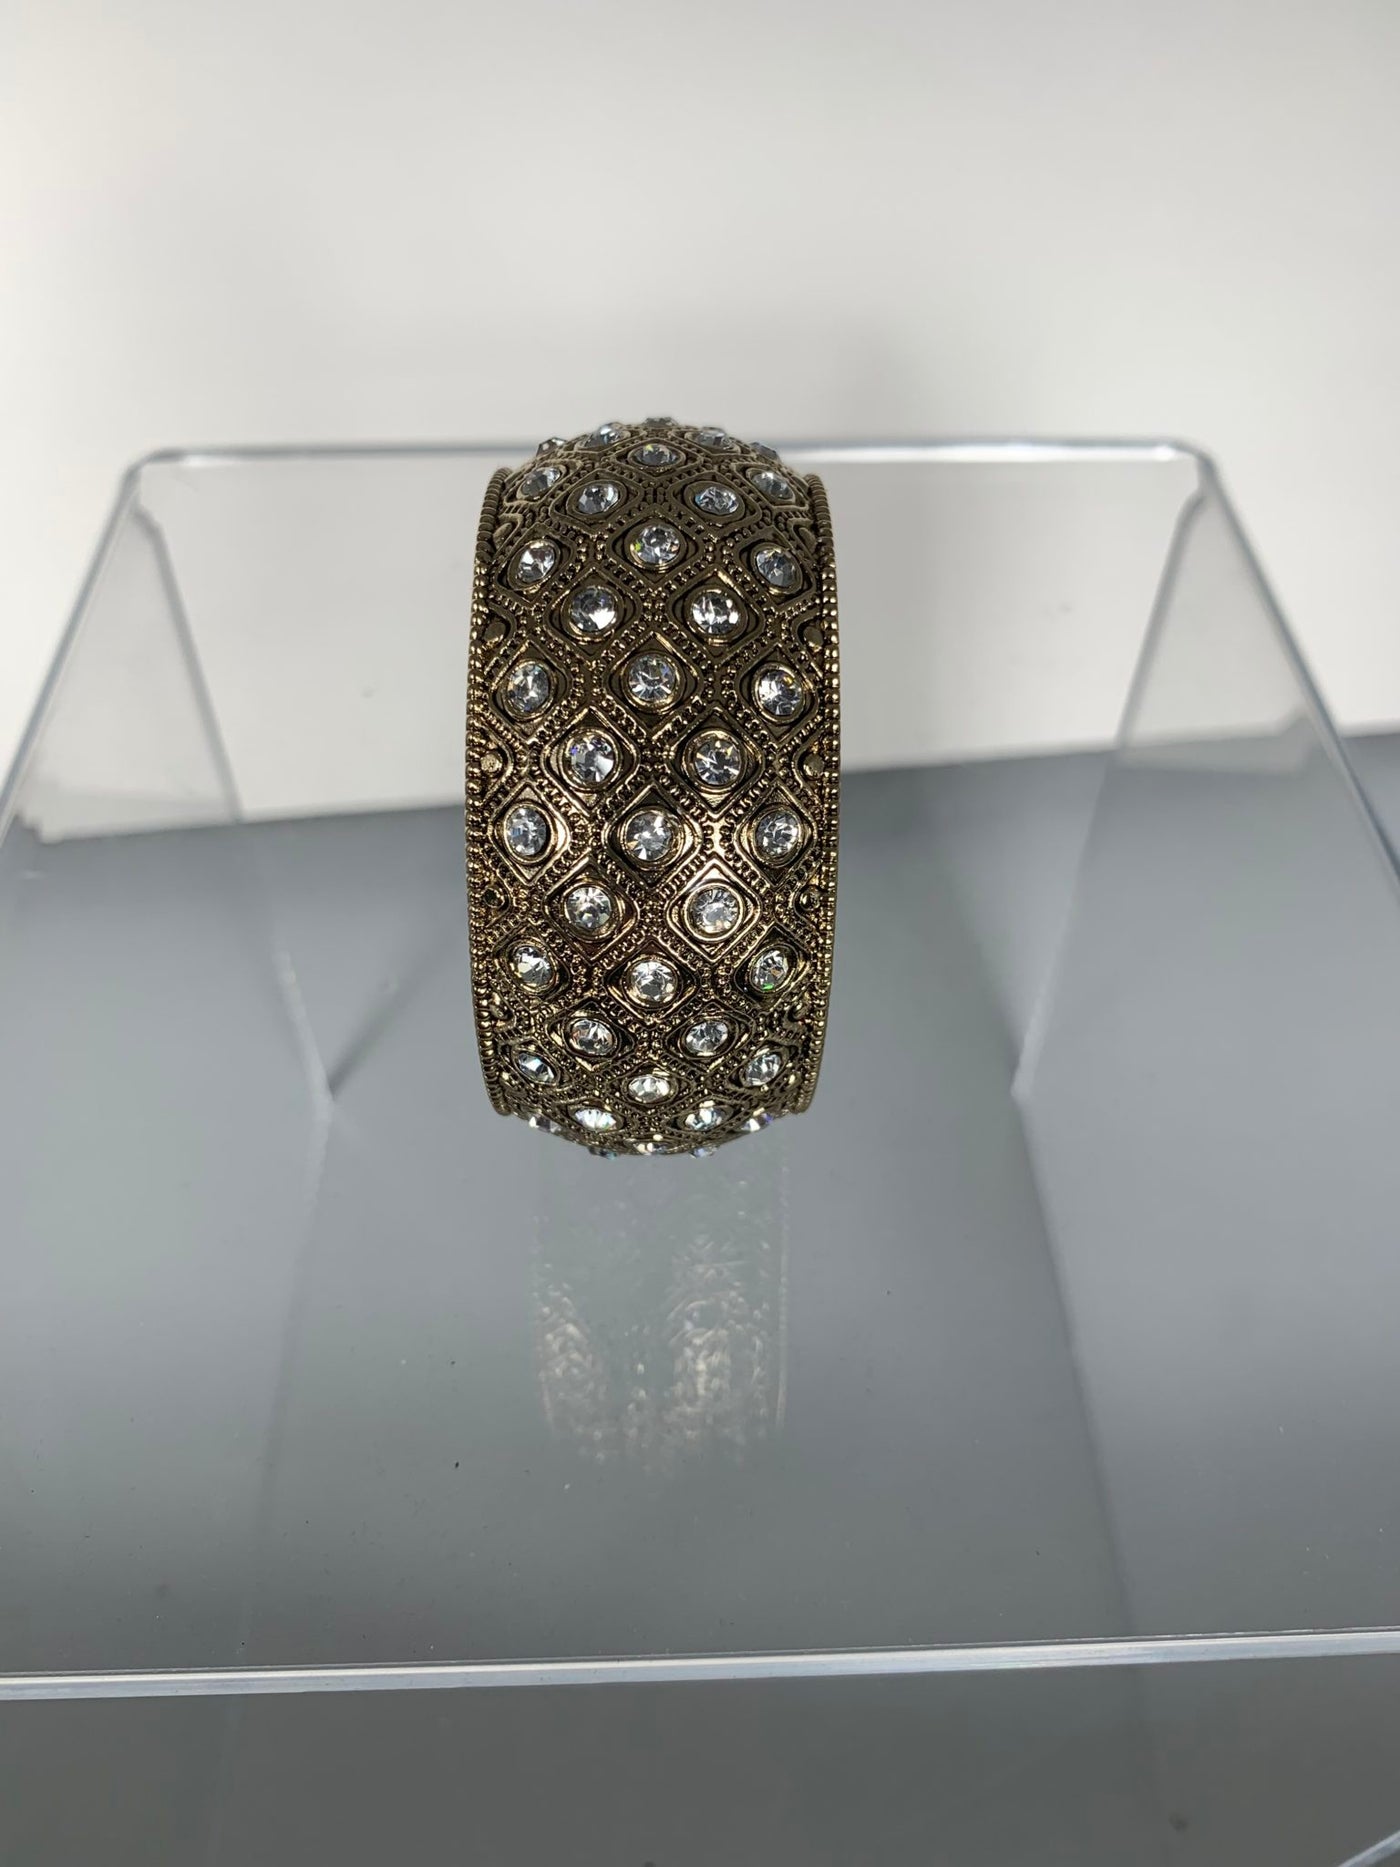 Bangle with Scattered Crystals in Gold Tone